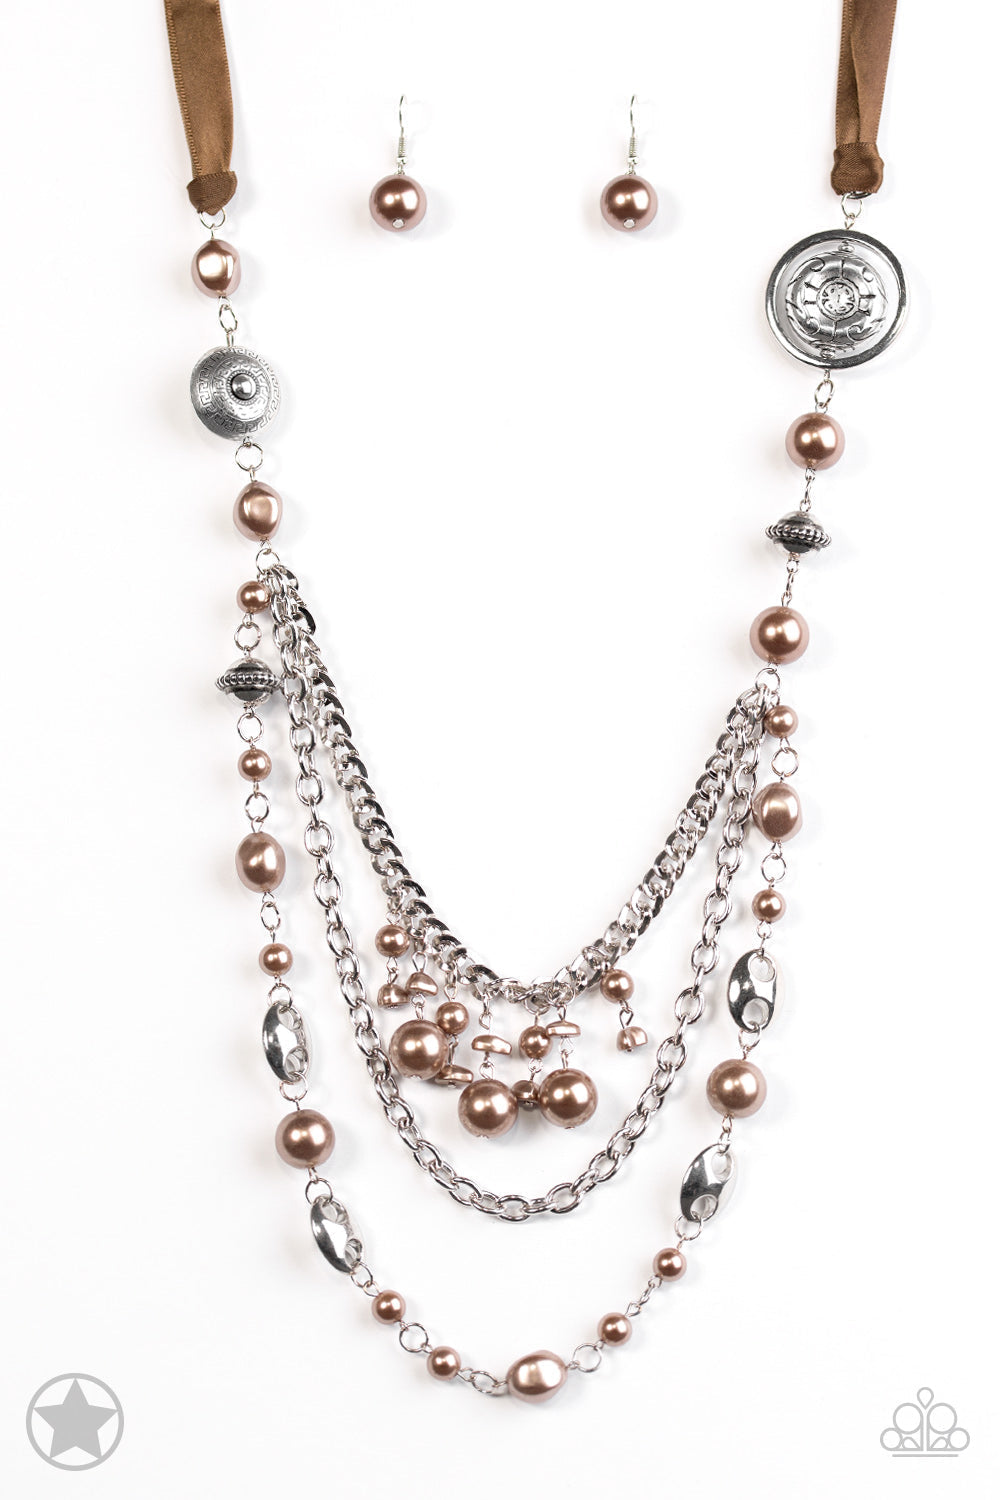 All The Trimmings - Brown and Silver Necklace - Paparazzi Accessories - A silky brown ribbon replaces a traditional chain to give an elegant look. Pearly brown beads and funky silver pieces intermix with varying lengths of silver chains to give a fresh take on a Victorian-inspired fashion necklace.